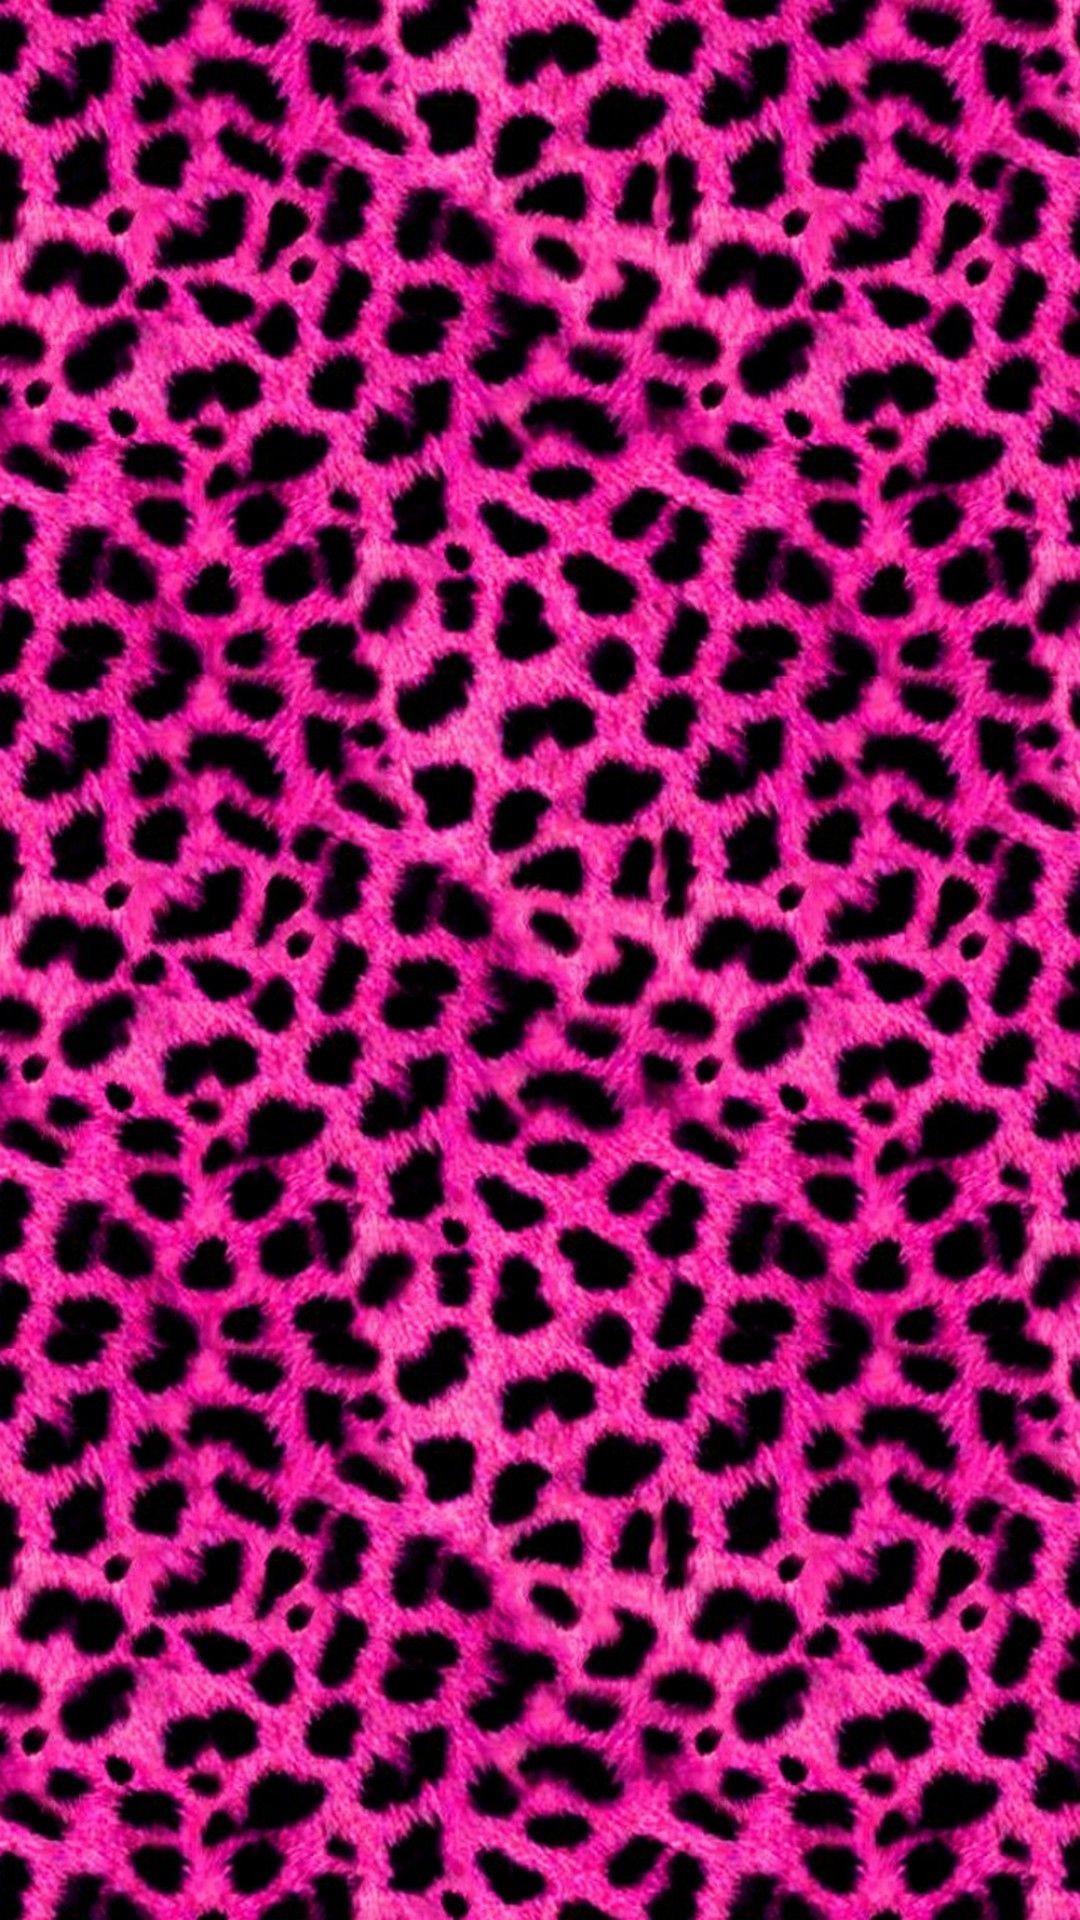 Pink Leopard Wallpaper Images  Free Photos PNG Stickers Wallpapers   Backgrounds  rawpixel